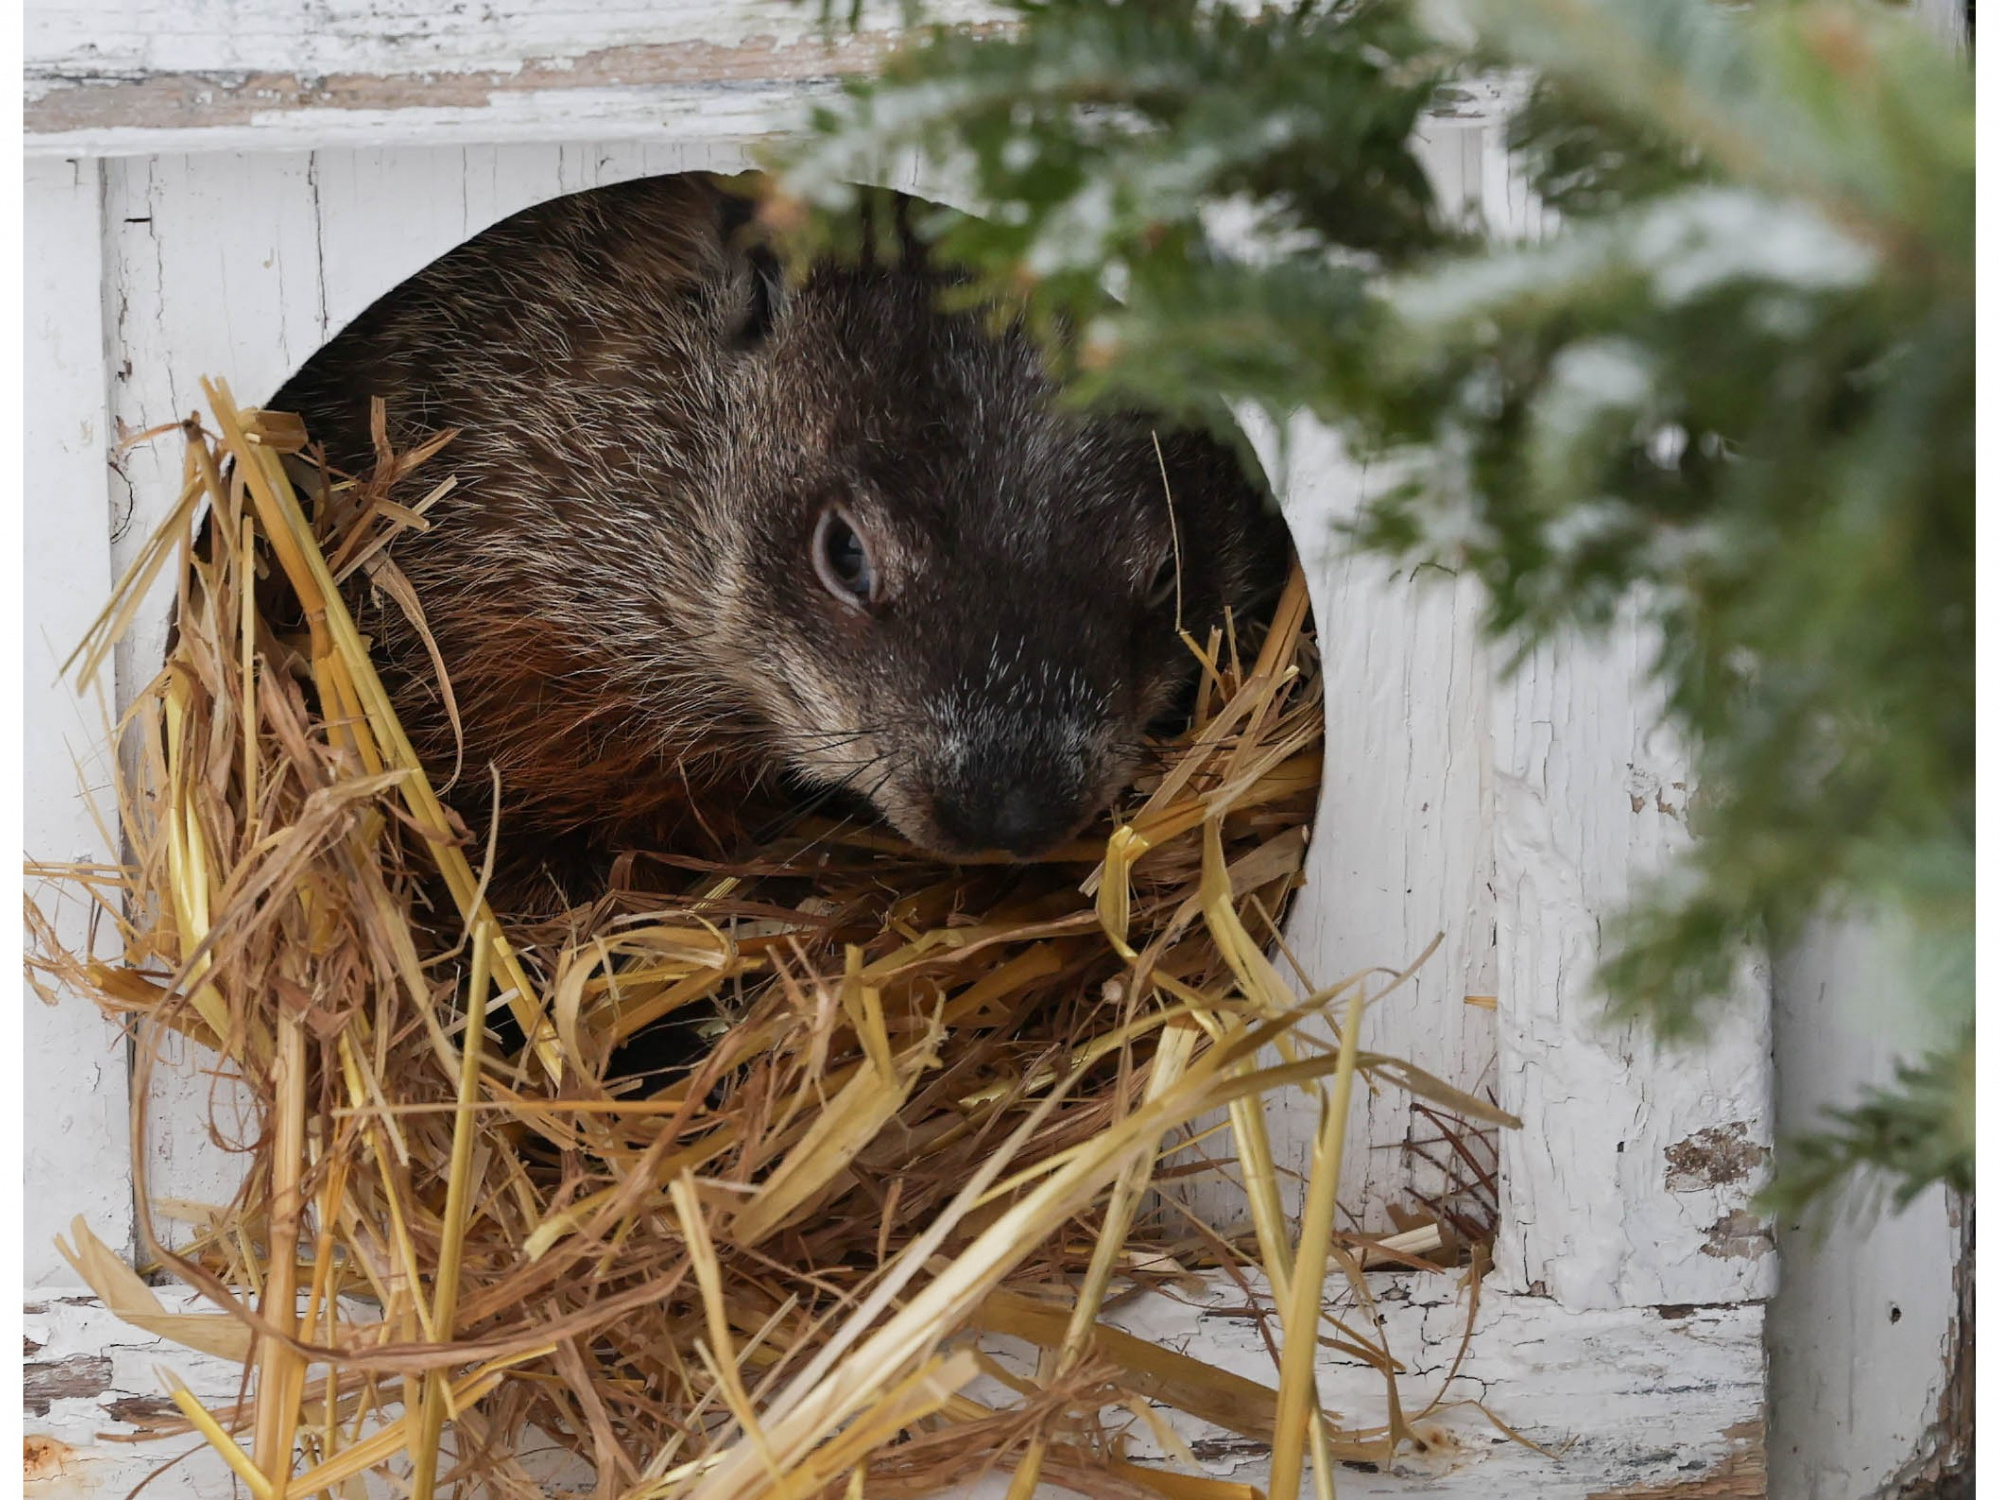 Photo of groundhog peeking out of its little house